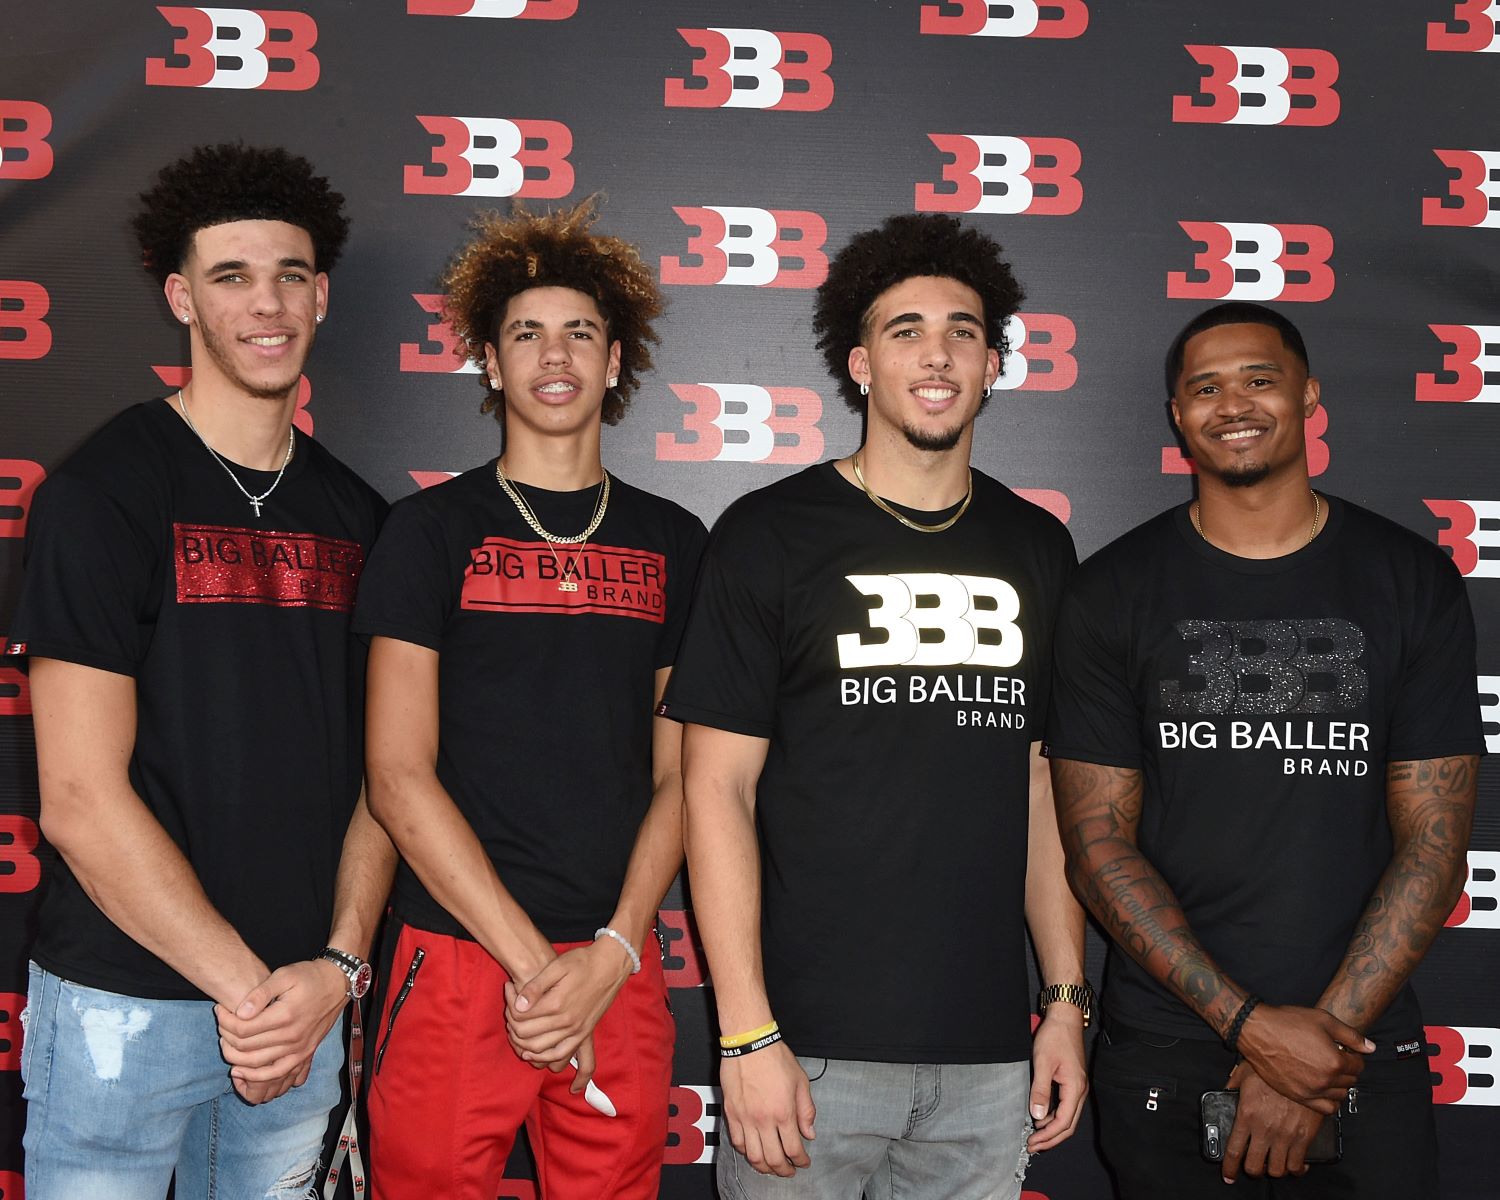 Lonzo Ball and LaMelo Ball became stars thanks to their basketball skills and their outspoken father. How many Ball brothers are there?